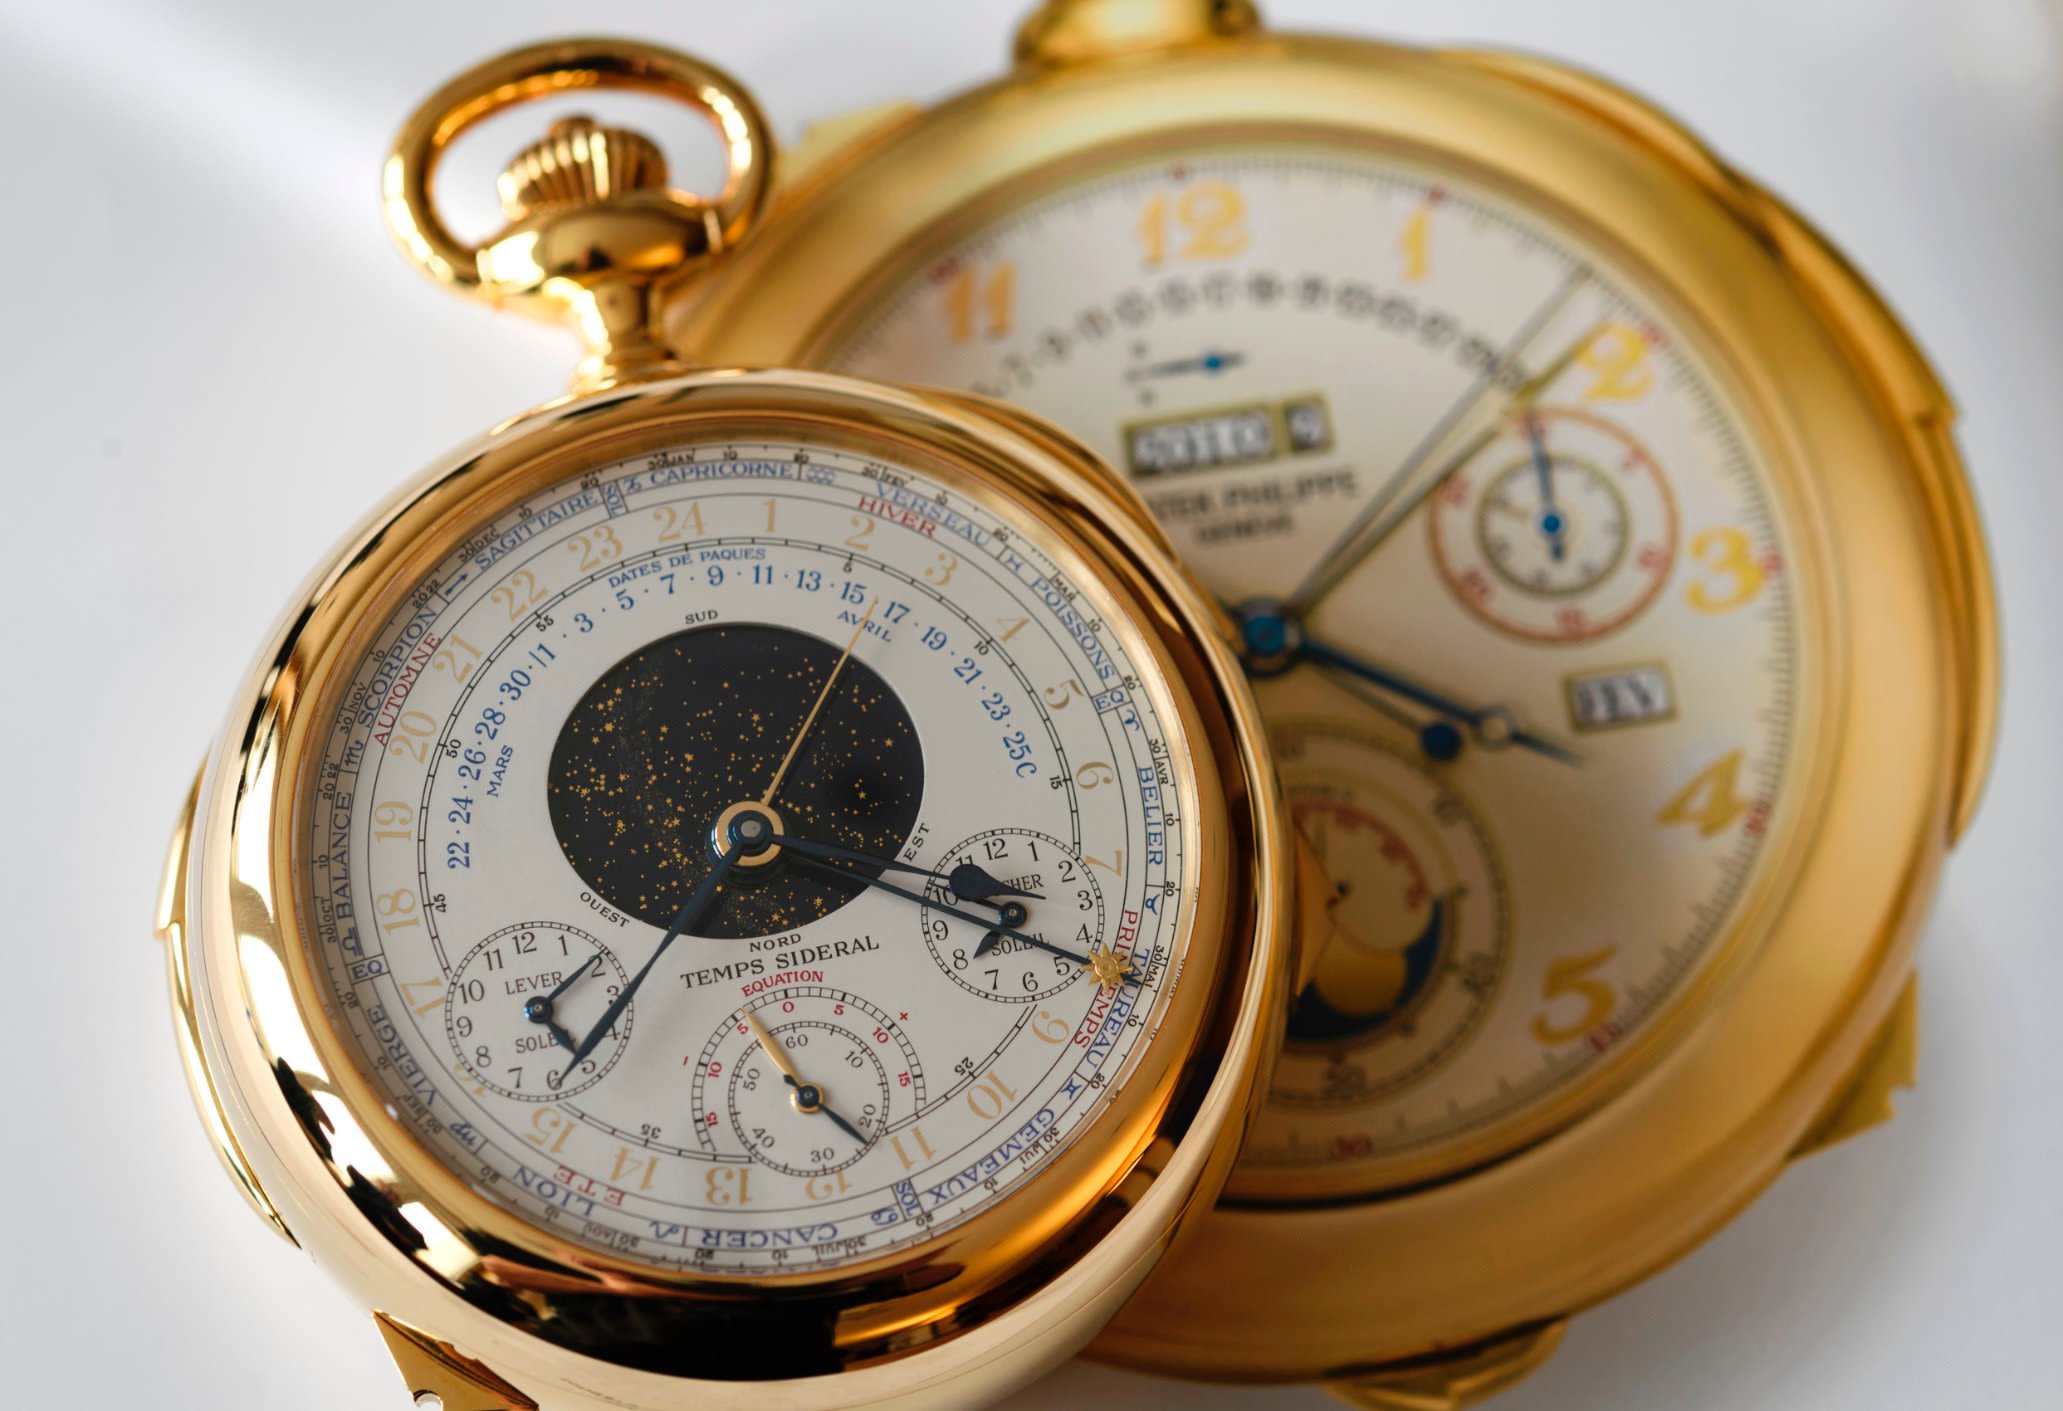 Patek Philippe Keeps Business In The Family